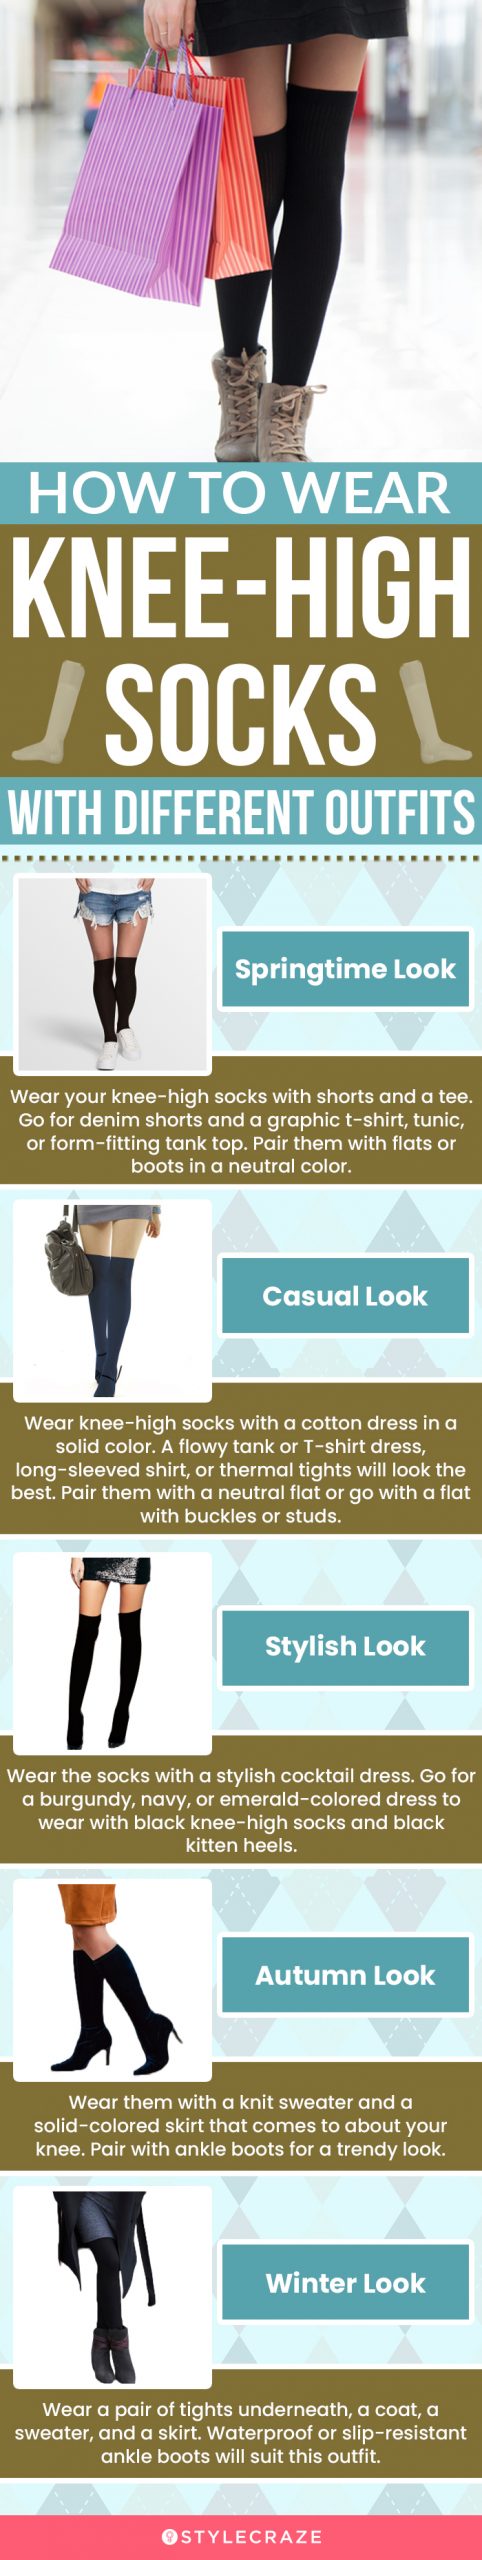 How To Wear Knee-High Socks With Different Outfits (infographic)